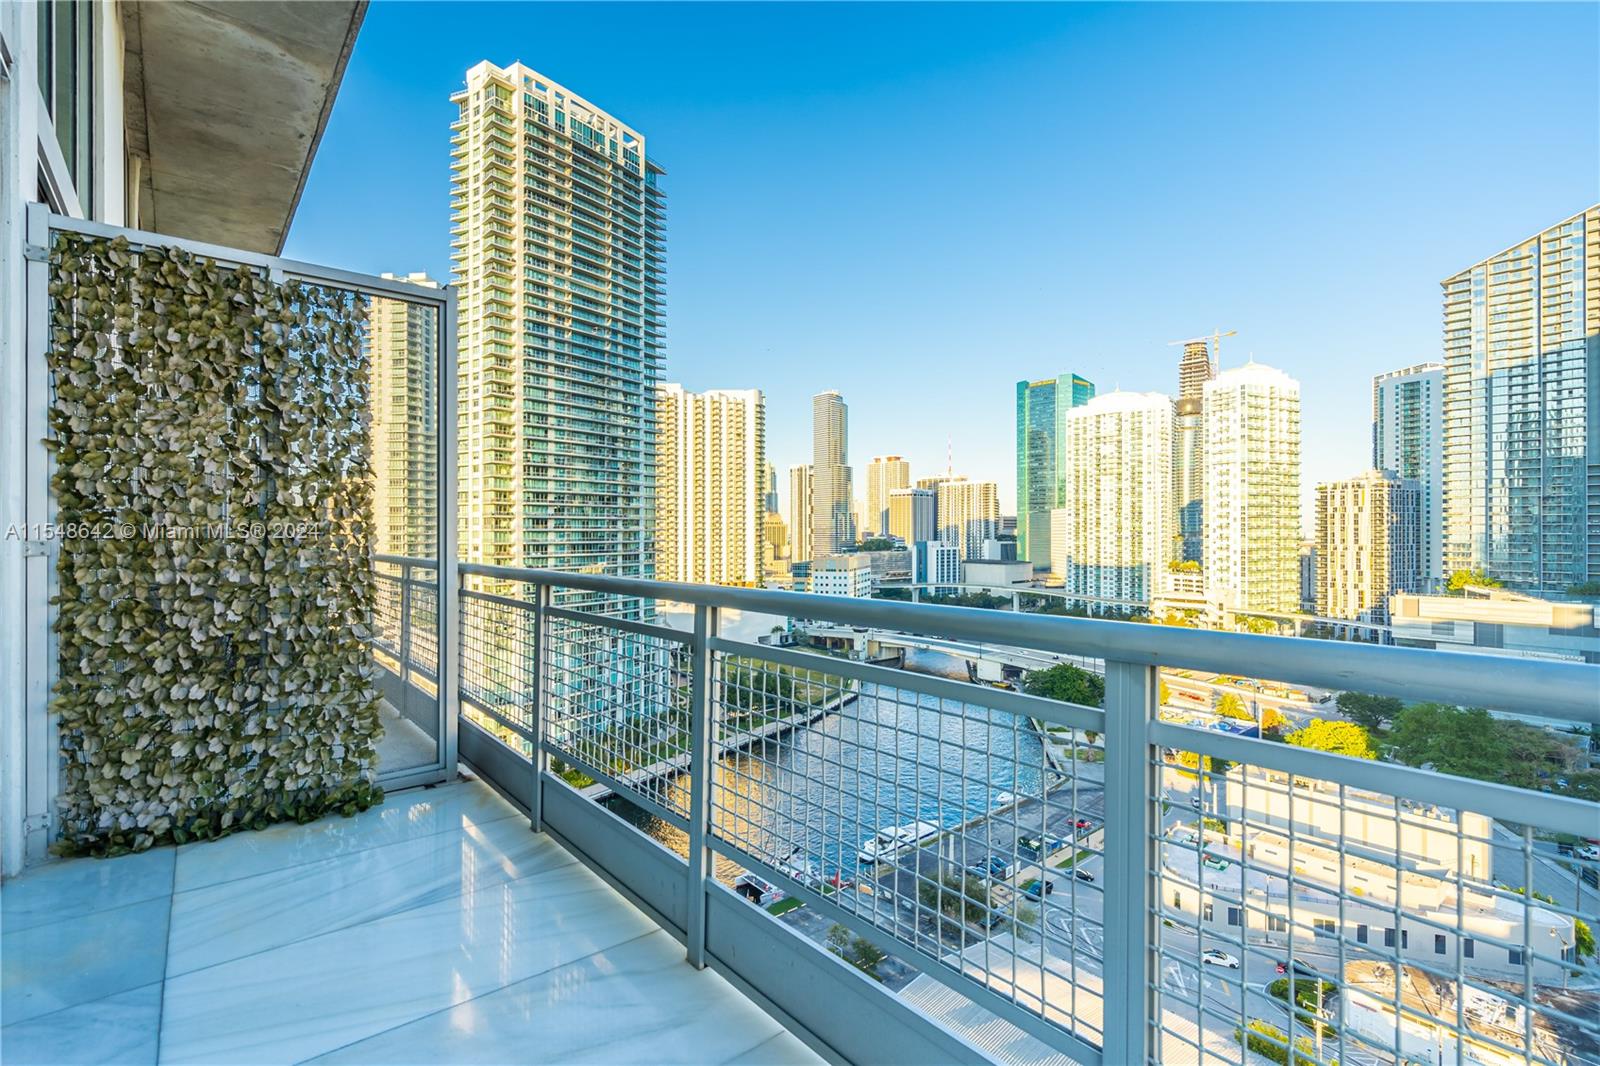 Fabulous two story loft style unit with views of Miami River and Brickell City Centre. Unit is open, spacious and bright. This is the Brickell, urban ideal of live, work & play. Top notch amenities including fitness center, pool, spa, 24hrs concierge, valet, dog park & club room. Steps away from new Brickell City Centre & hottest restaurants/bars in Brickell. Right on the river walk and just two blocks away from the Metro Rail. Real square footage per owner is 1280 sqft as there is an extra bedroom.